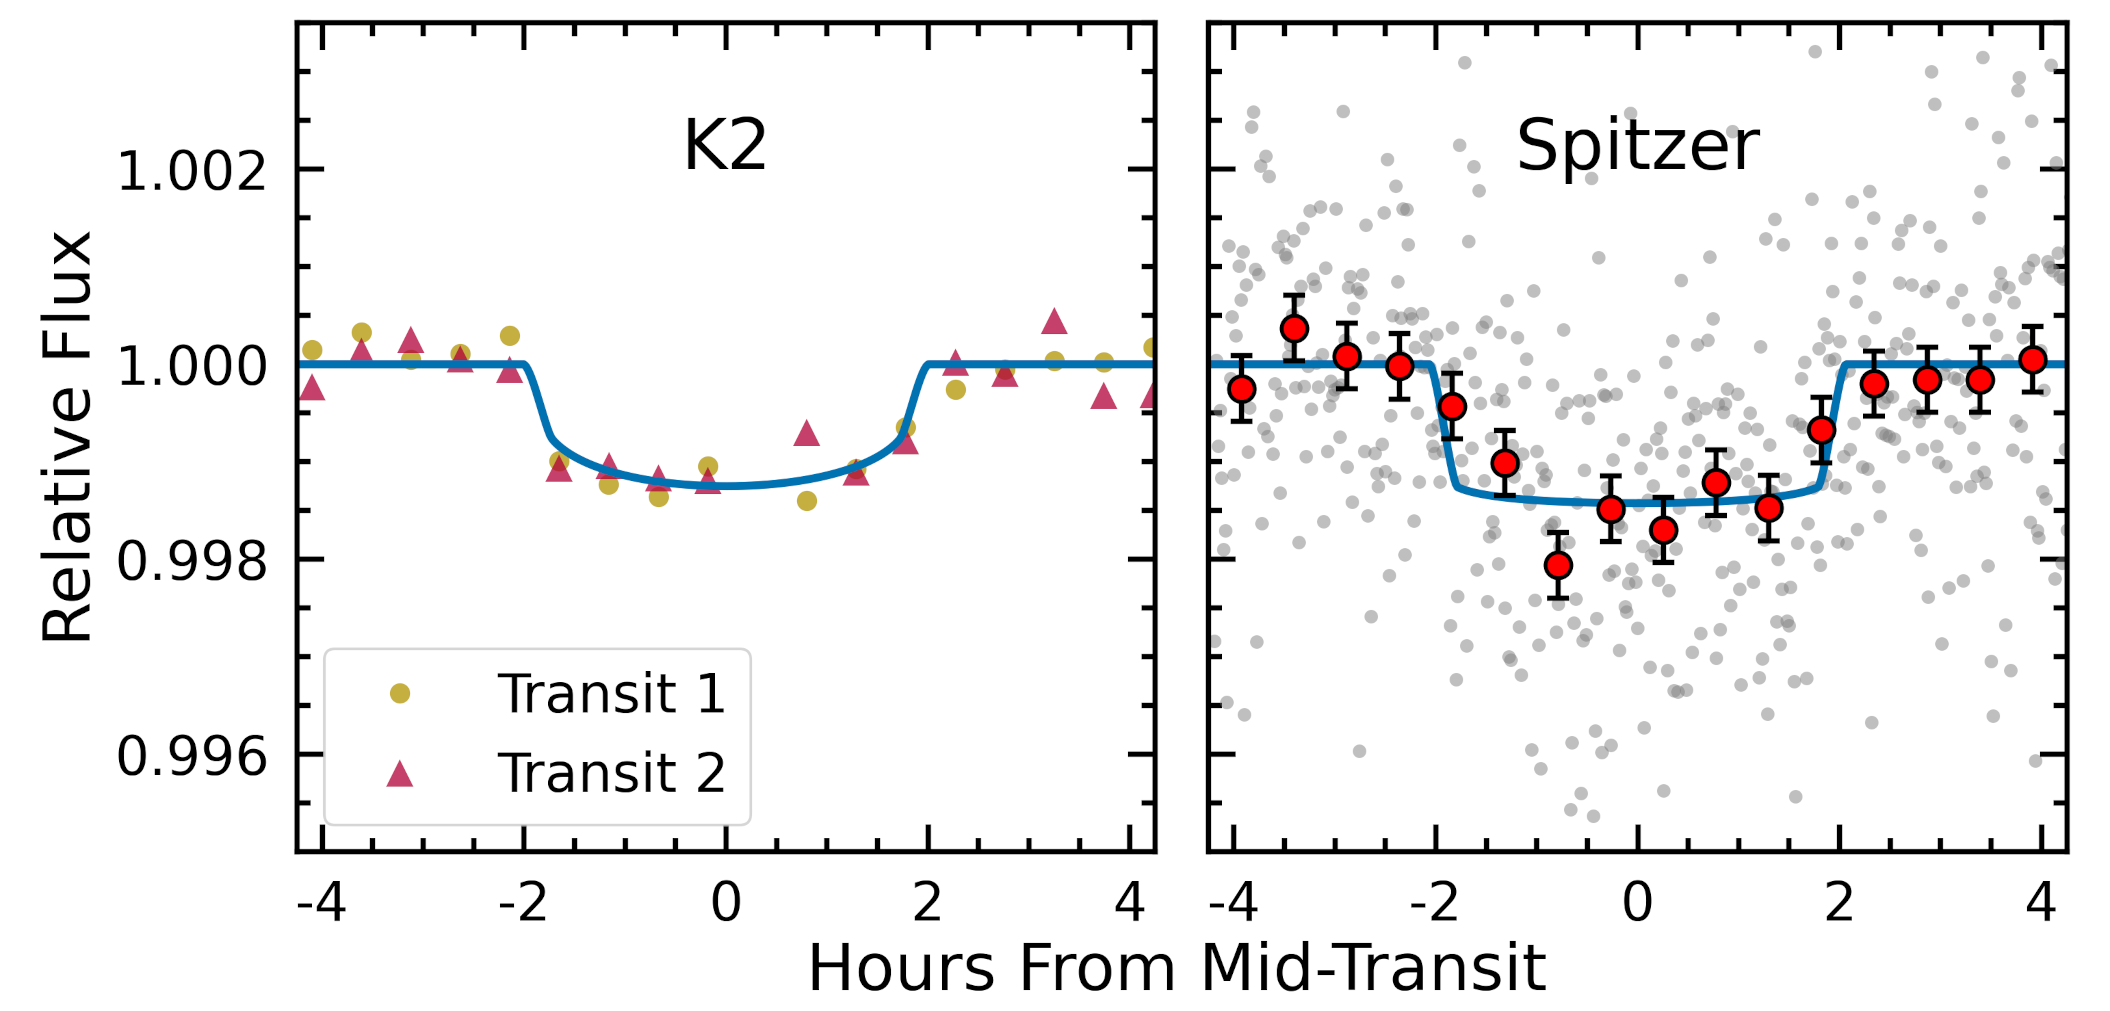 K2-138 g light curves from K2 (left) and Spitzer (right).